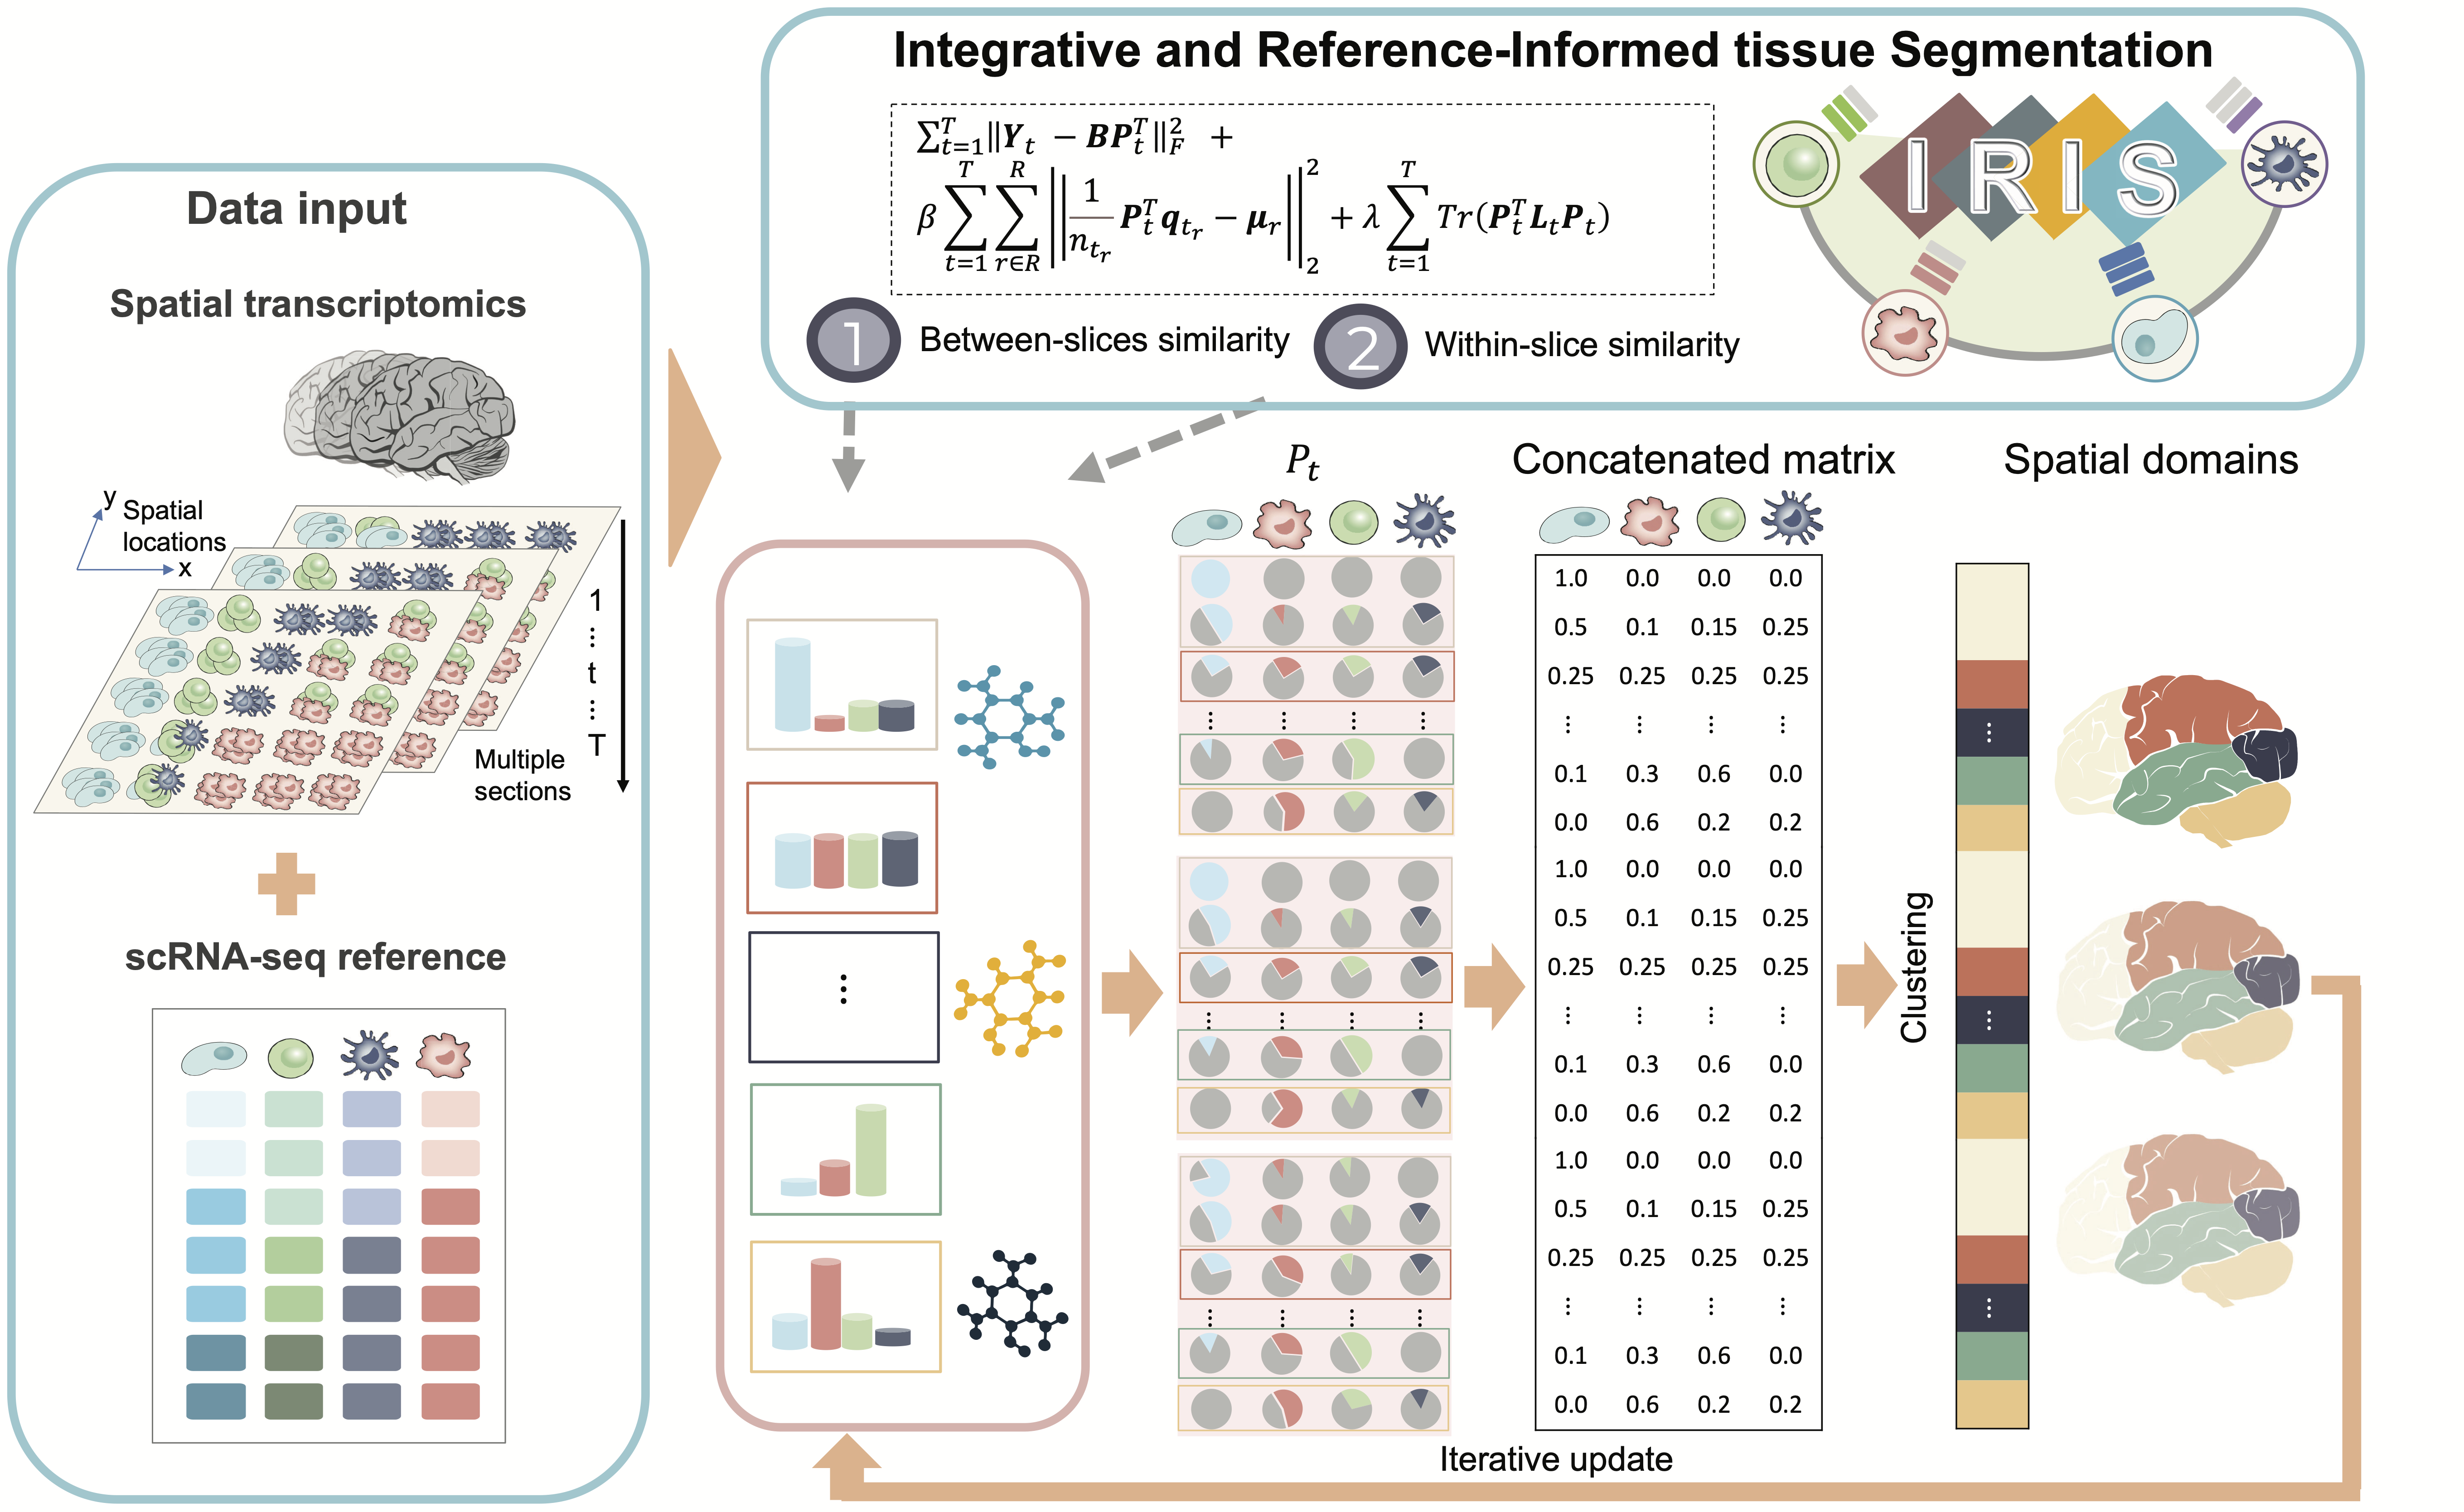 Accurate and Efficient Integrative Reference-Informed Spatial Domain Detection for Spatial Transcriptomics 